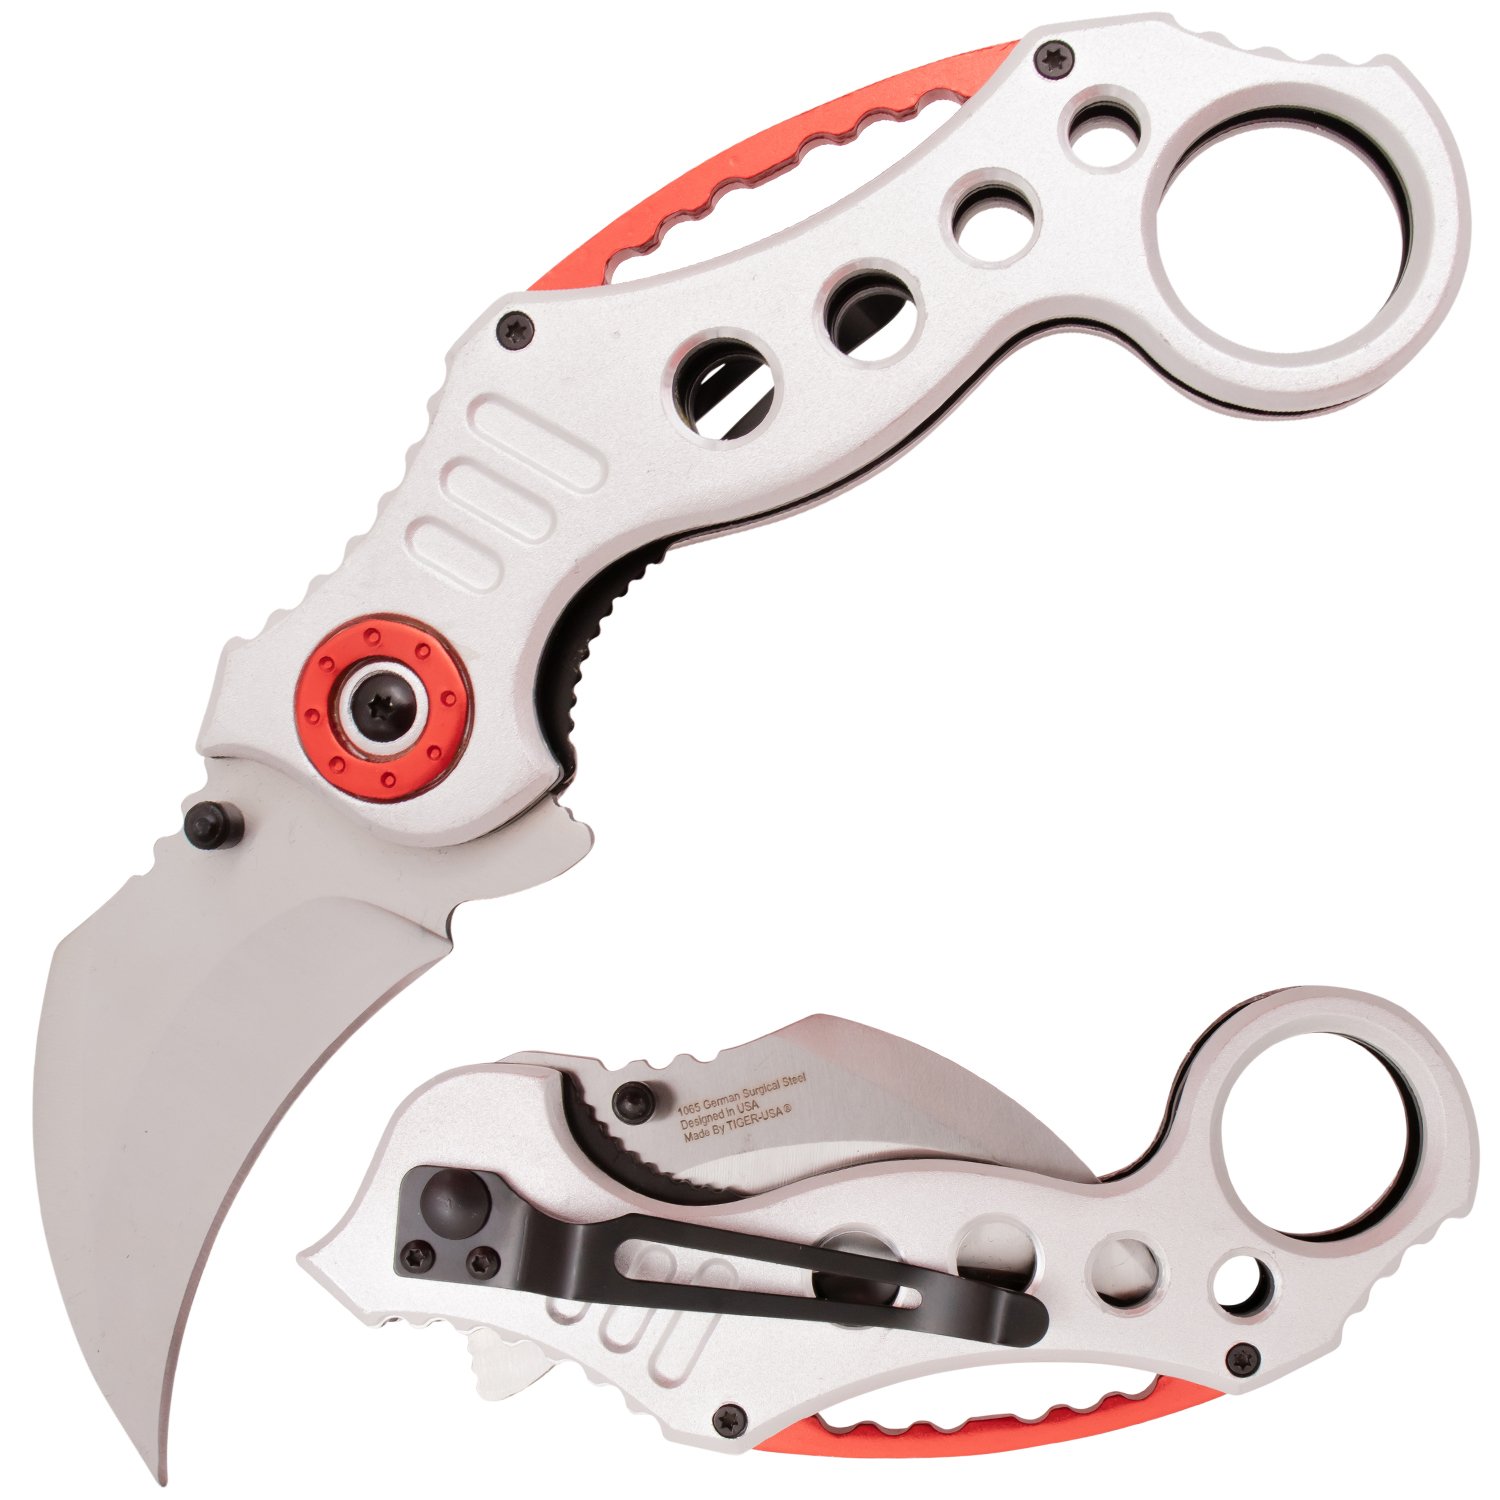 Tiger USA Spring Assisted Knife Red Silver